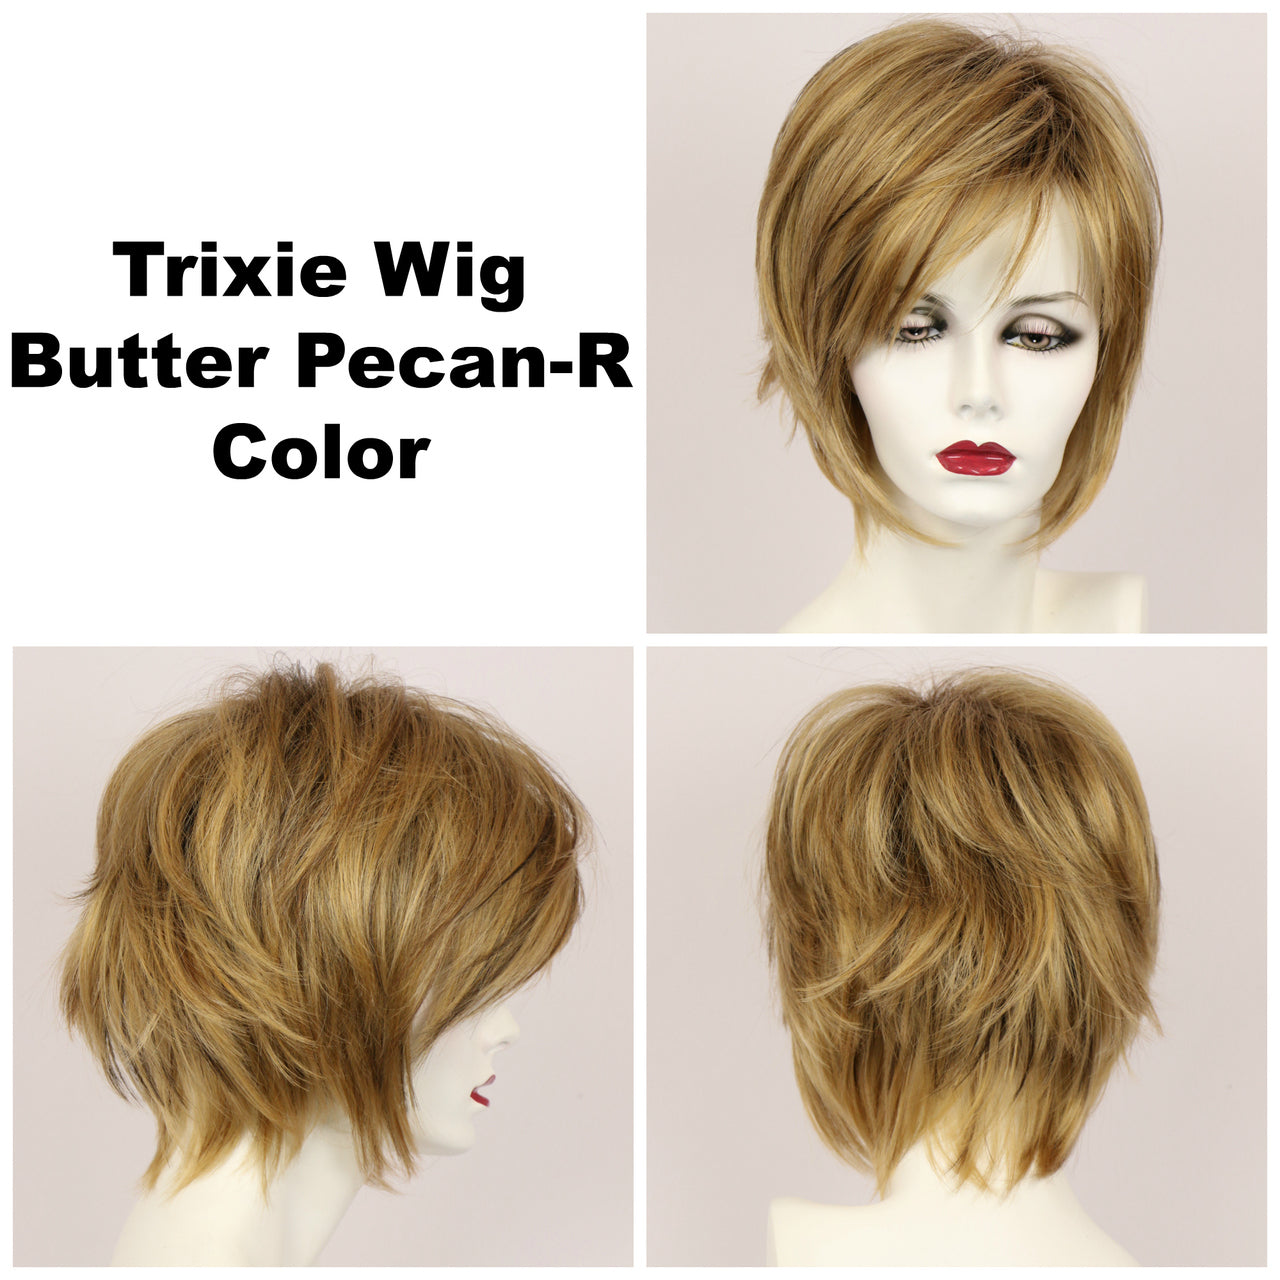 Butter Pecan-R / Trixie w/ Roots / Medium Wig